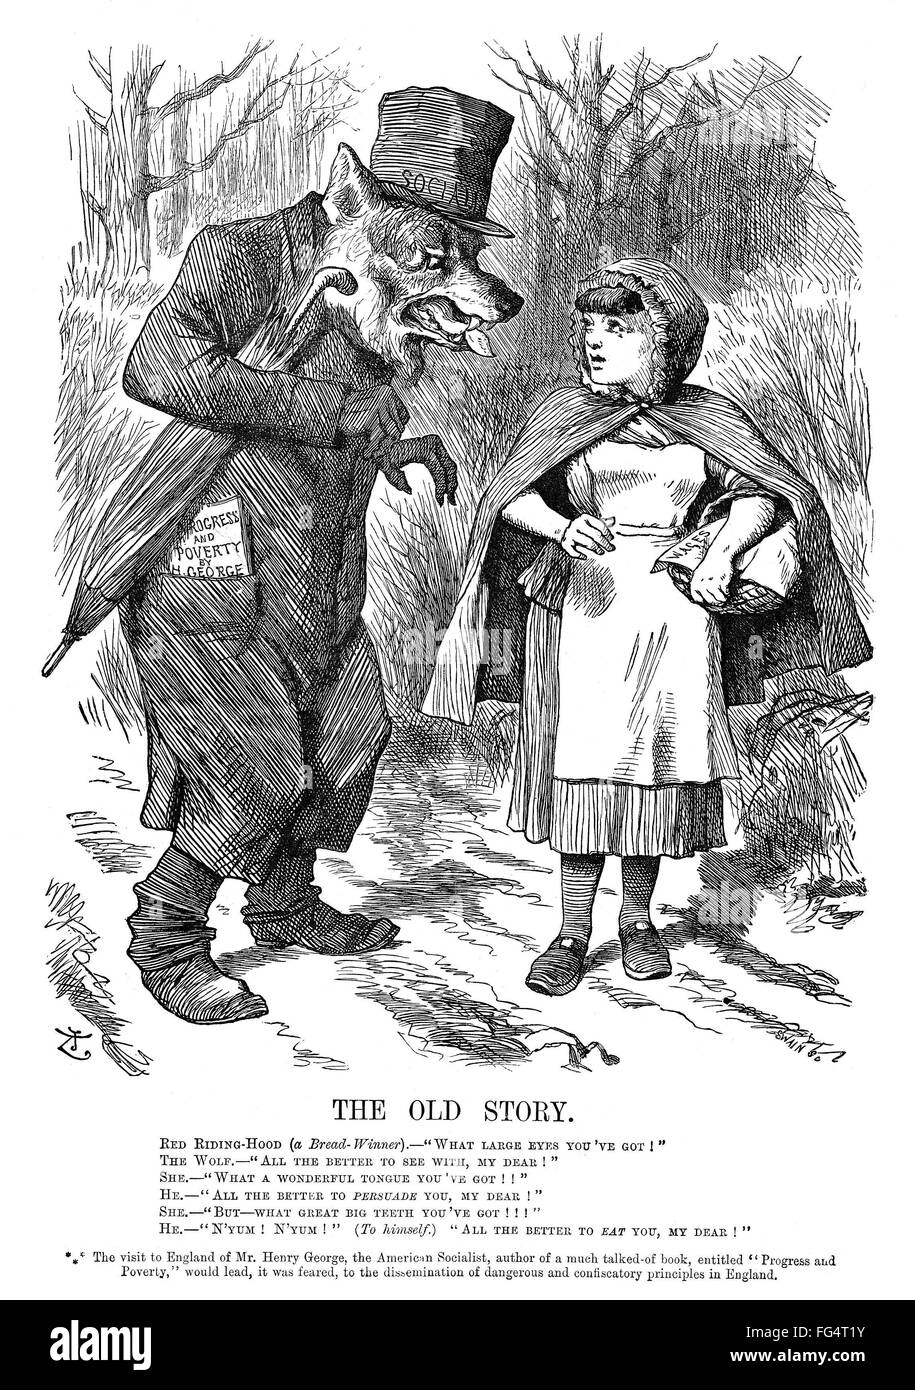 CARTOON: SOCIALISM, 1879. /nBritish cartoon illustrating the fear that the visit of Henry George, author of 'Progress and Poverty,' to England, would lead to Socialist confiscatory practices in England. Engraving, c1879. Stock Photo